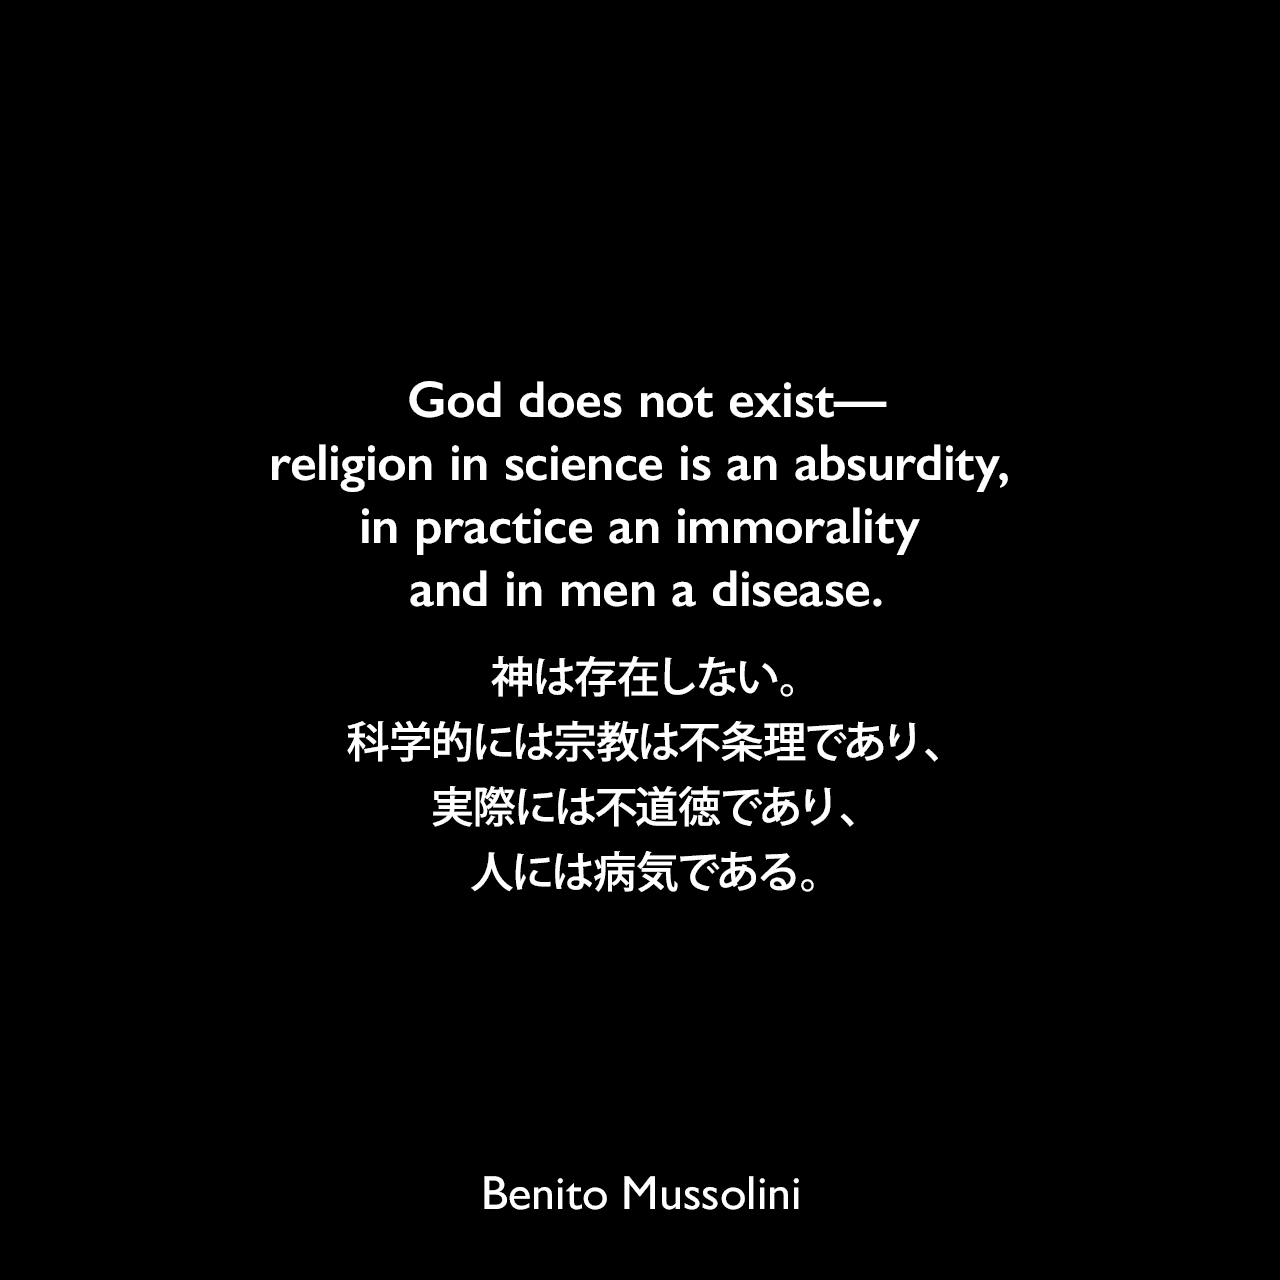 God does not exist—religion in science is an absurdity, in practice an immorality and in men a disease.神は存在しない。科学的には宗教は不条理であり、実際には不道徳であり、人には病気である。- 1924年8月25日タイム誌「ベニートはキリスト教徒か？」よりBenito Mussolini